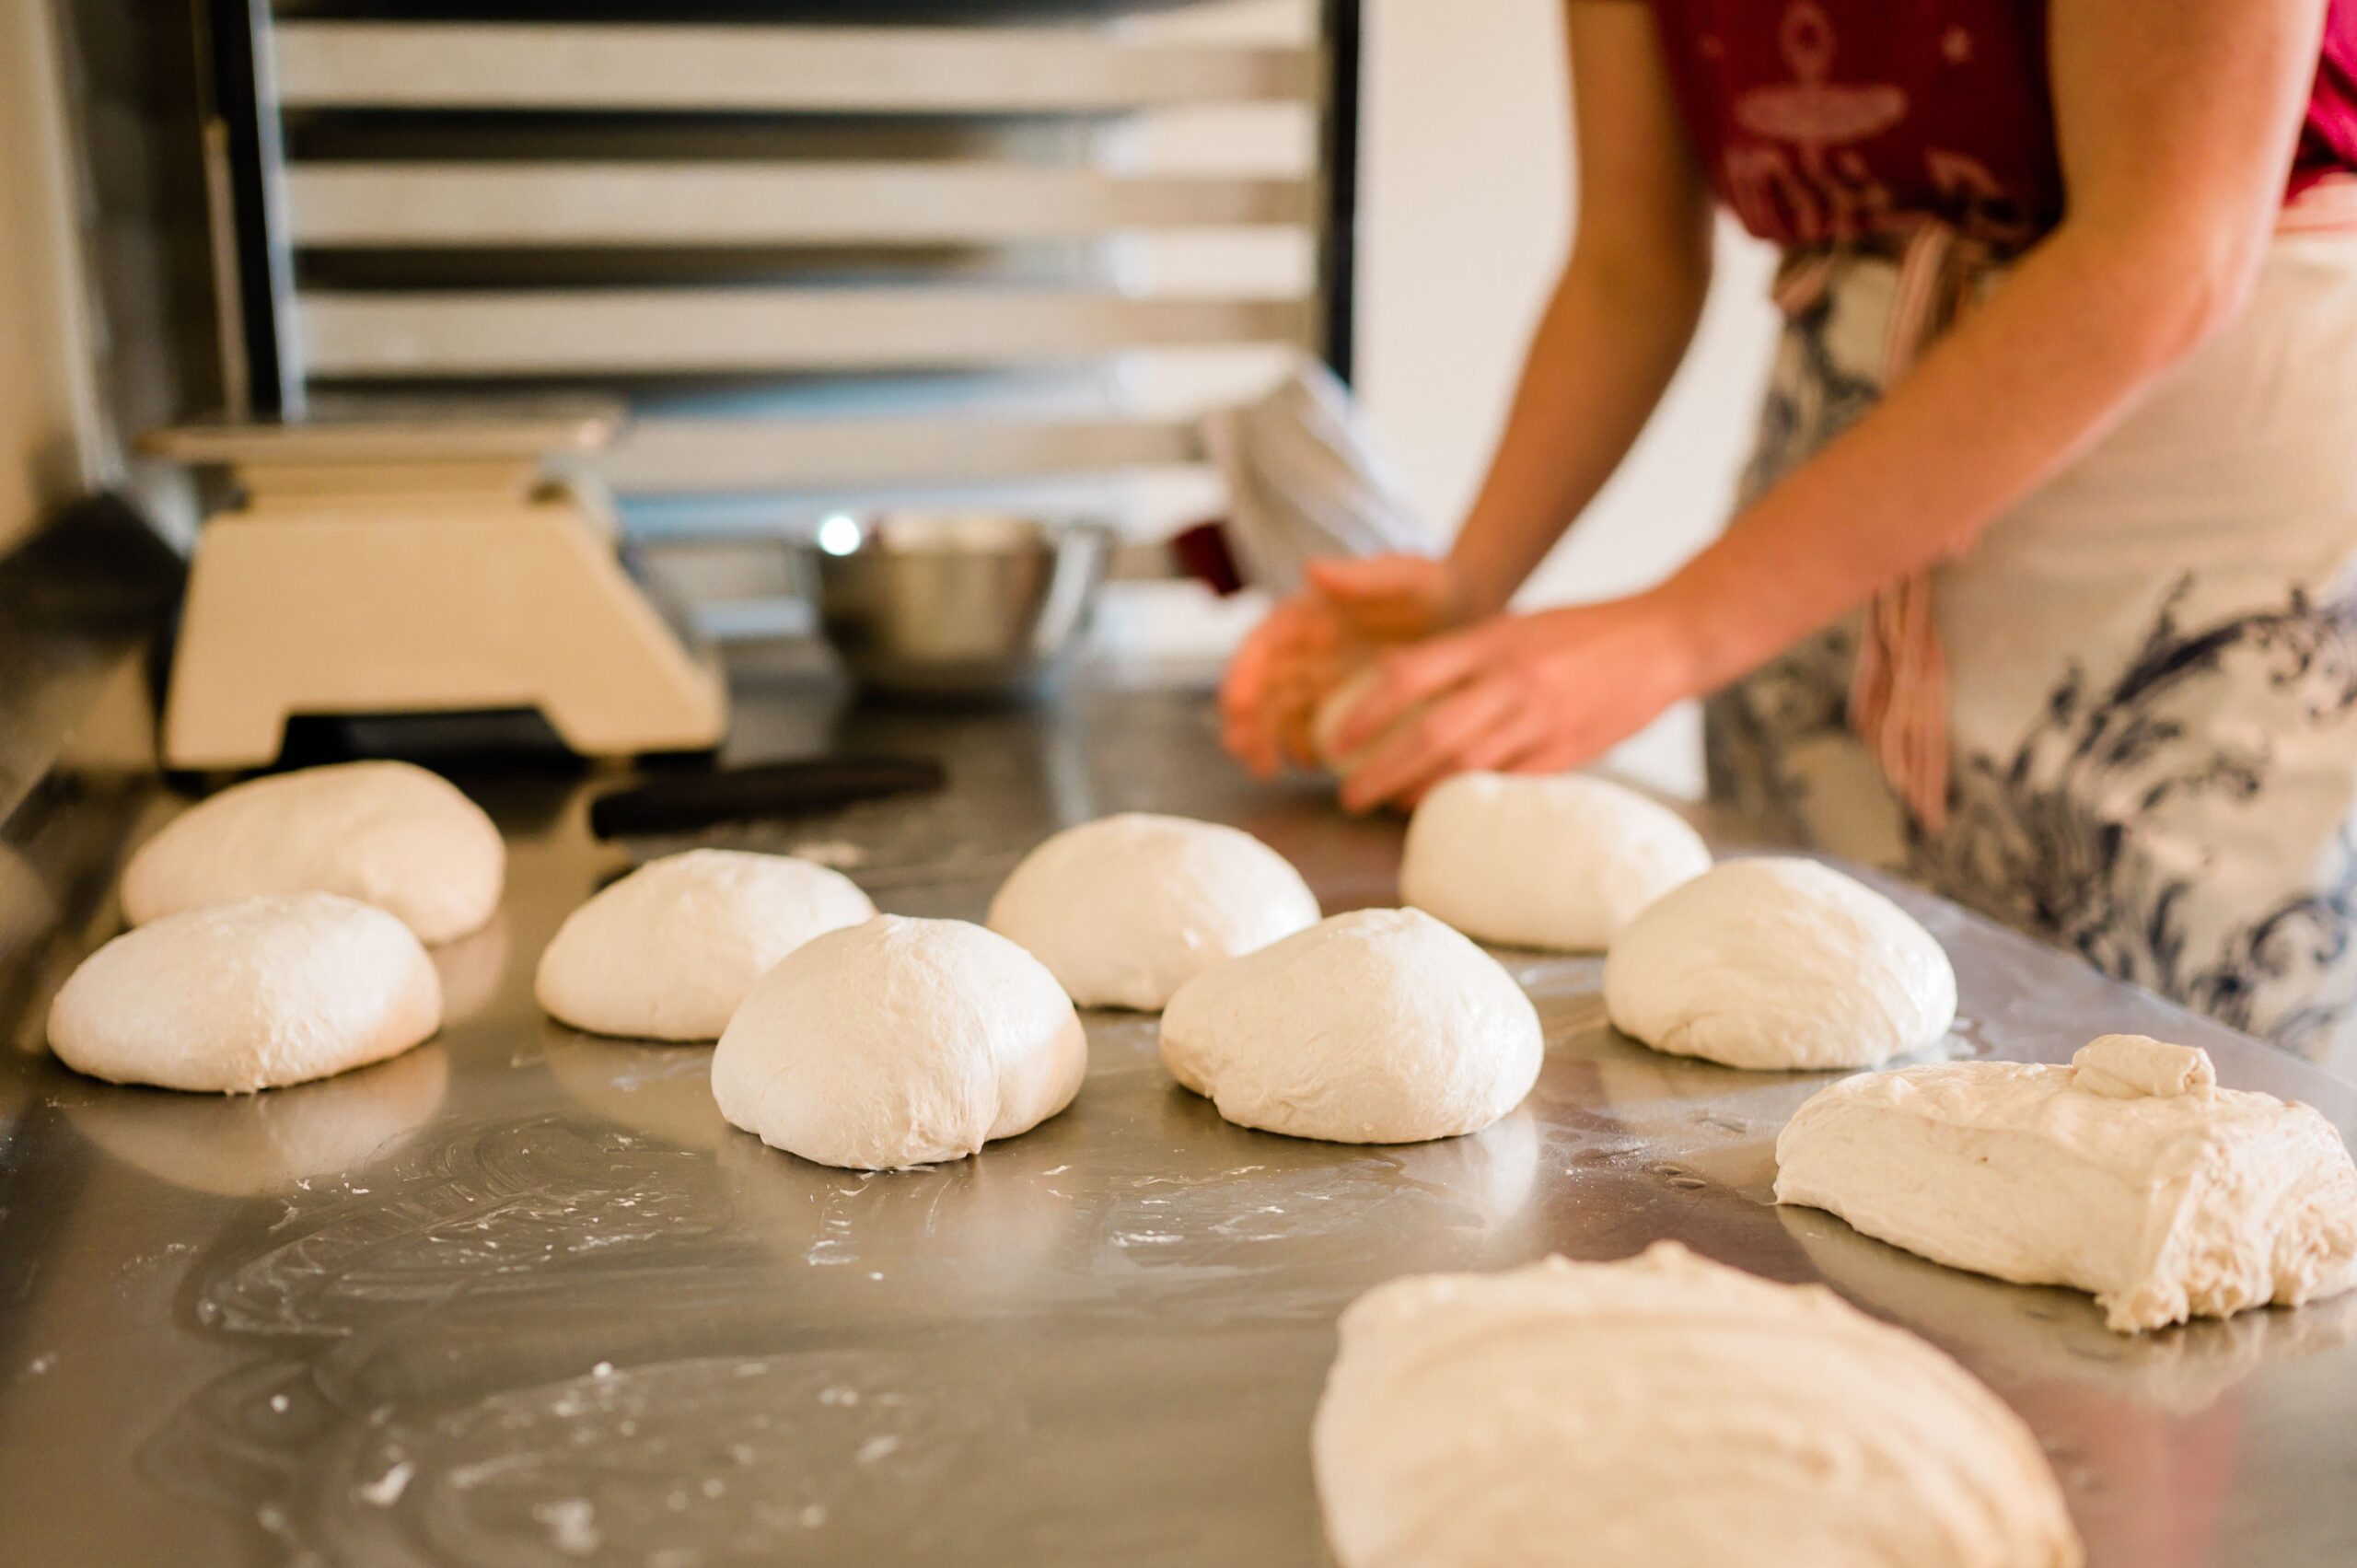 A steel counter with rolls of uncooked bread dough stand while a woman's hands are shown kneading the dough.